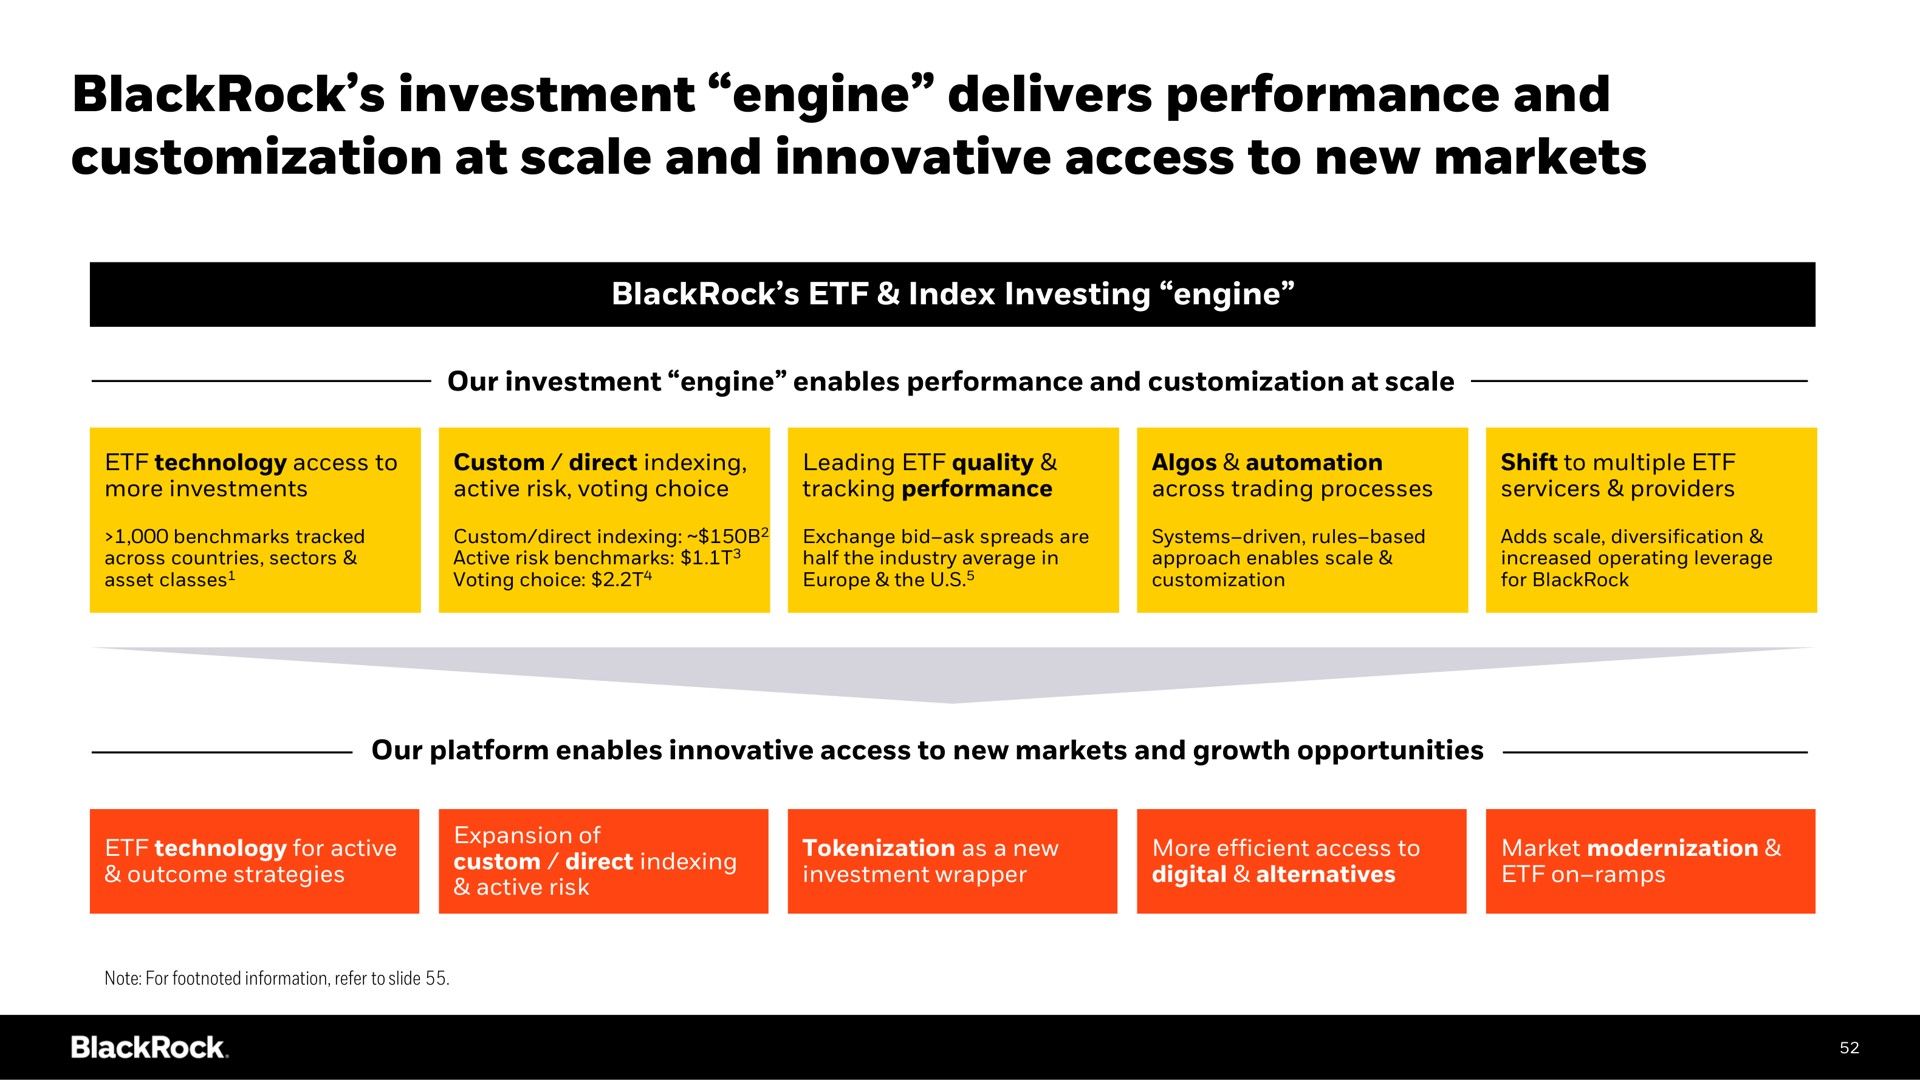 investment engine delivers performance and at scale and innovative access to new markets | BlackRock